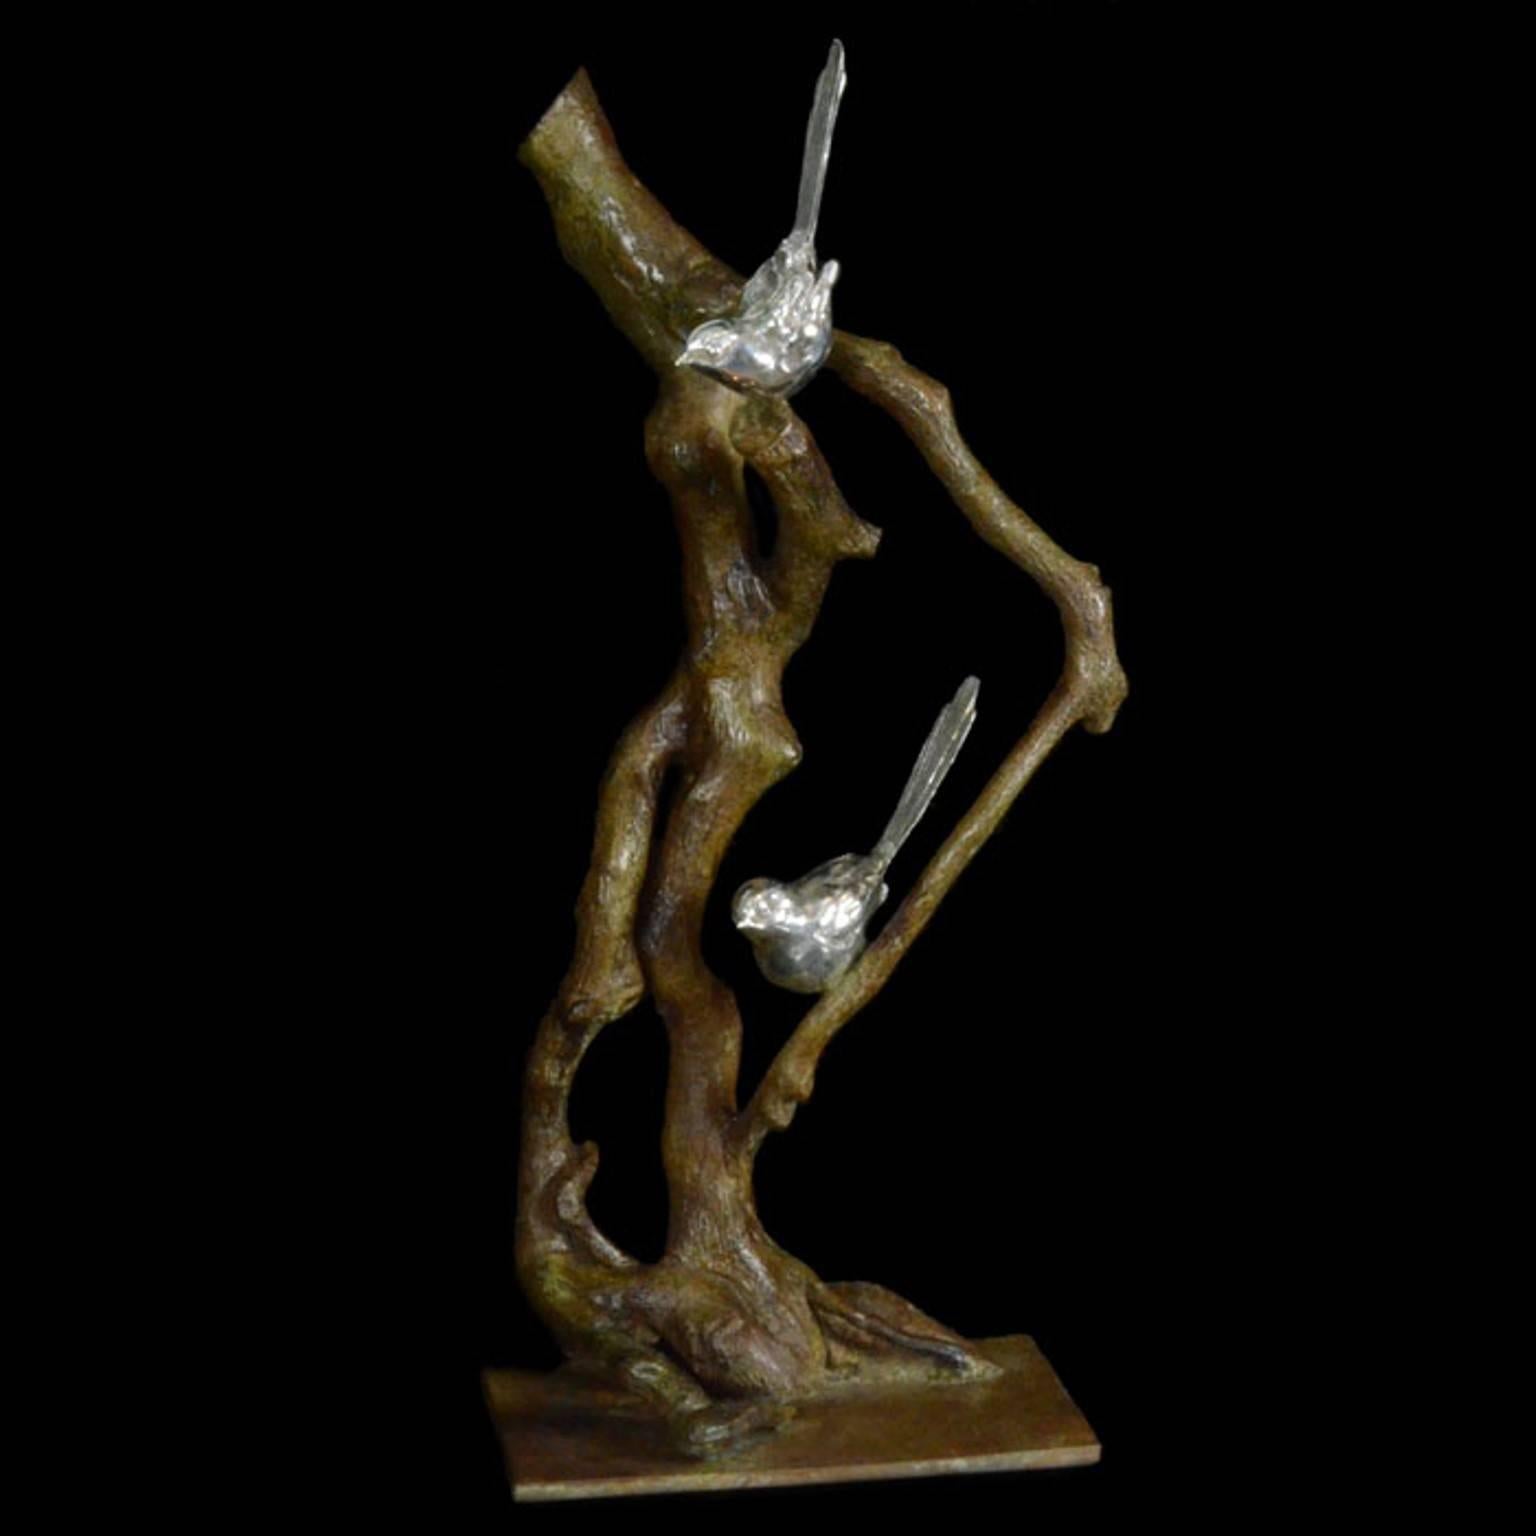 Ian Bowles Figurative Sculpture - A pair of silver long-tailed tits on a bronze branch 